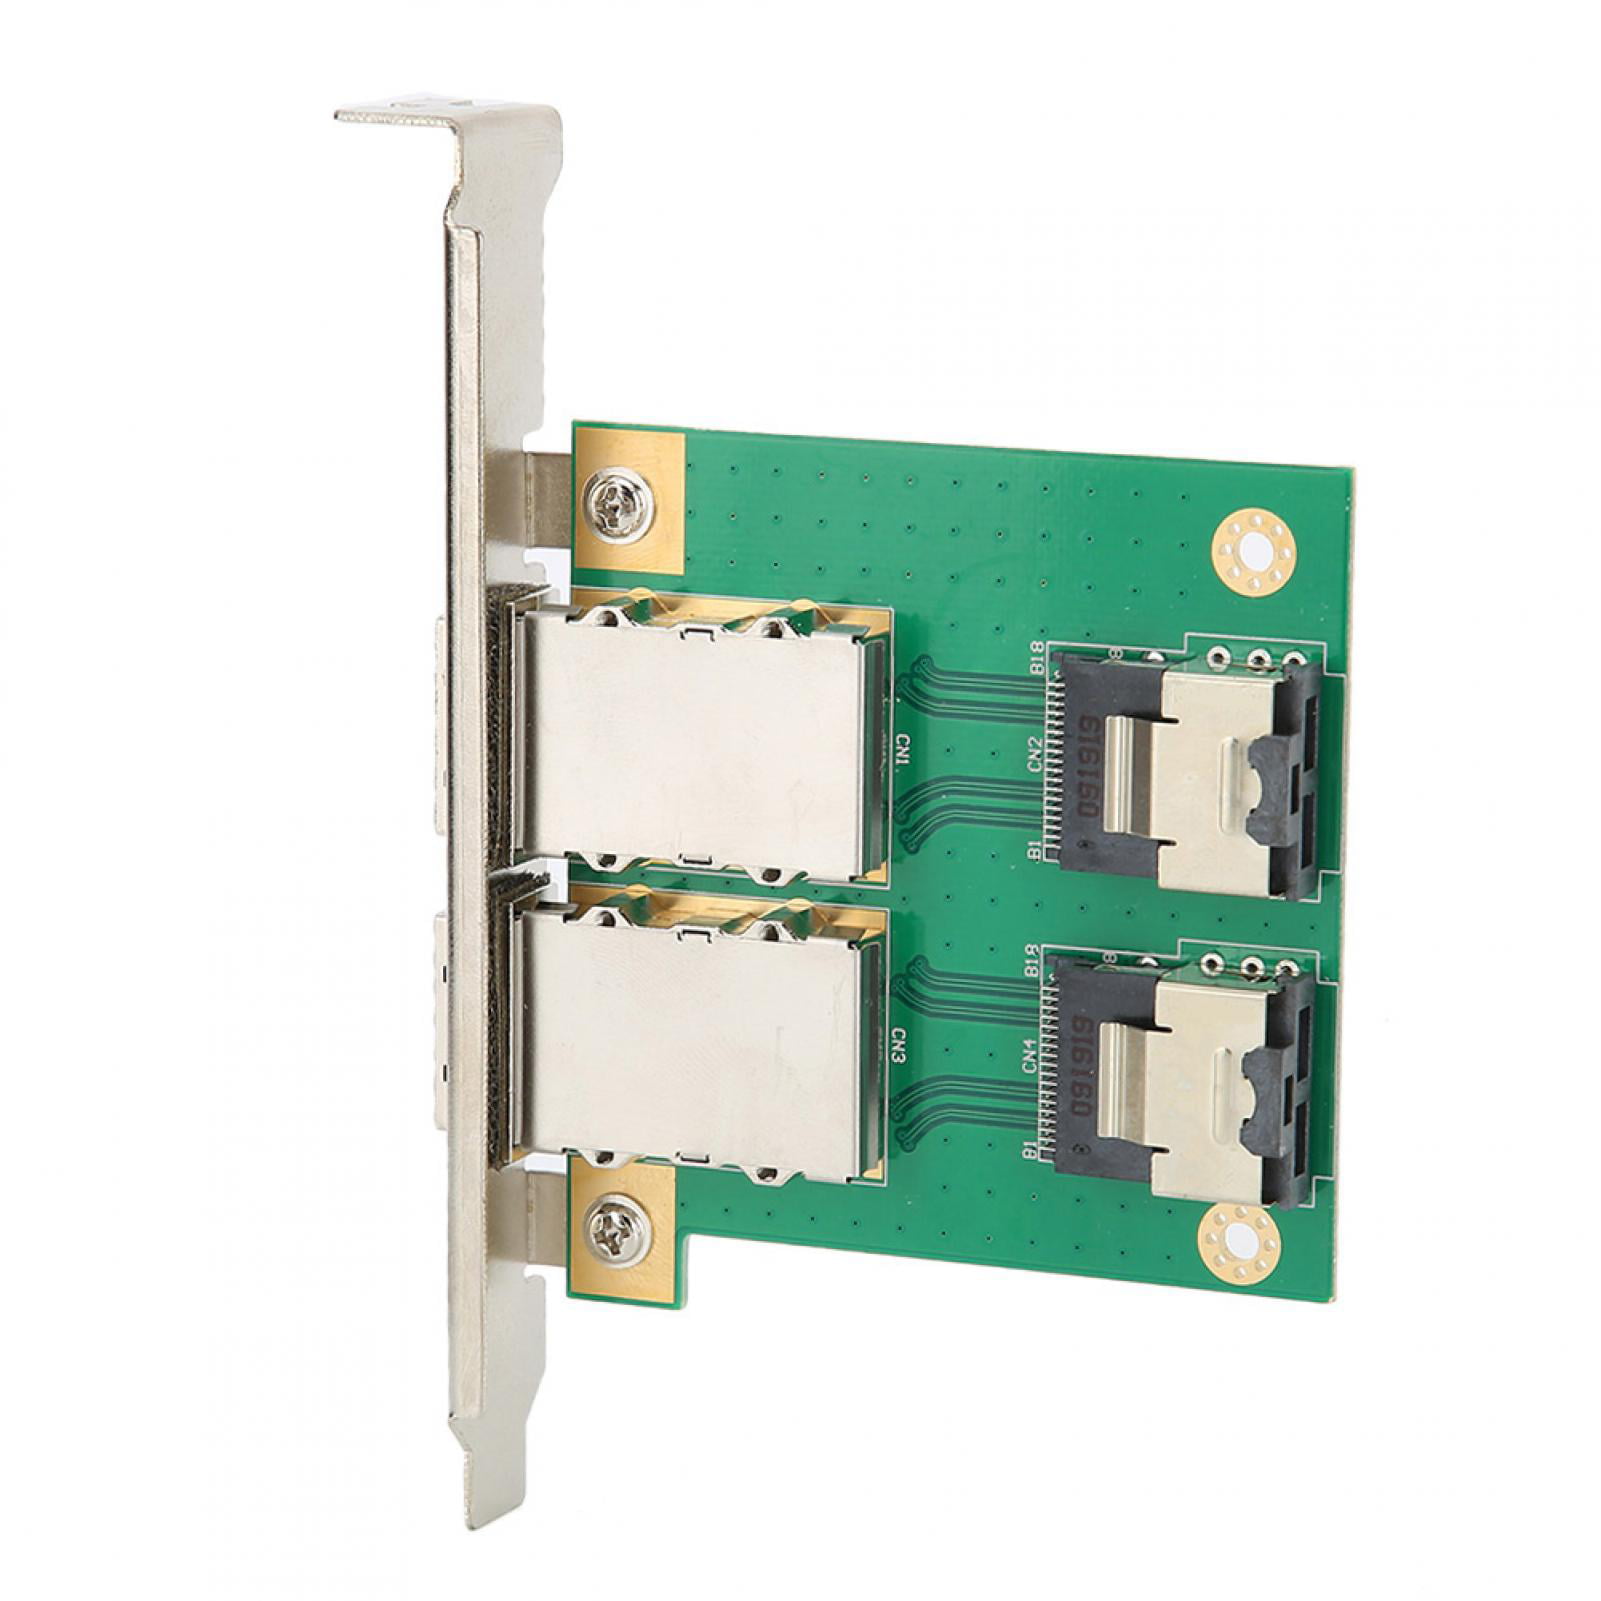 SFF-8087 to SFF-8088 Internal External Electronic Transfer Component 2 Ports Adapter Card with Complete PCI Slot Mounting Bracket 